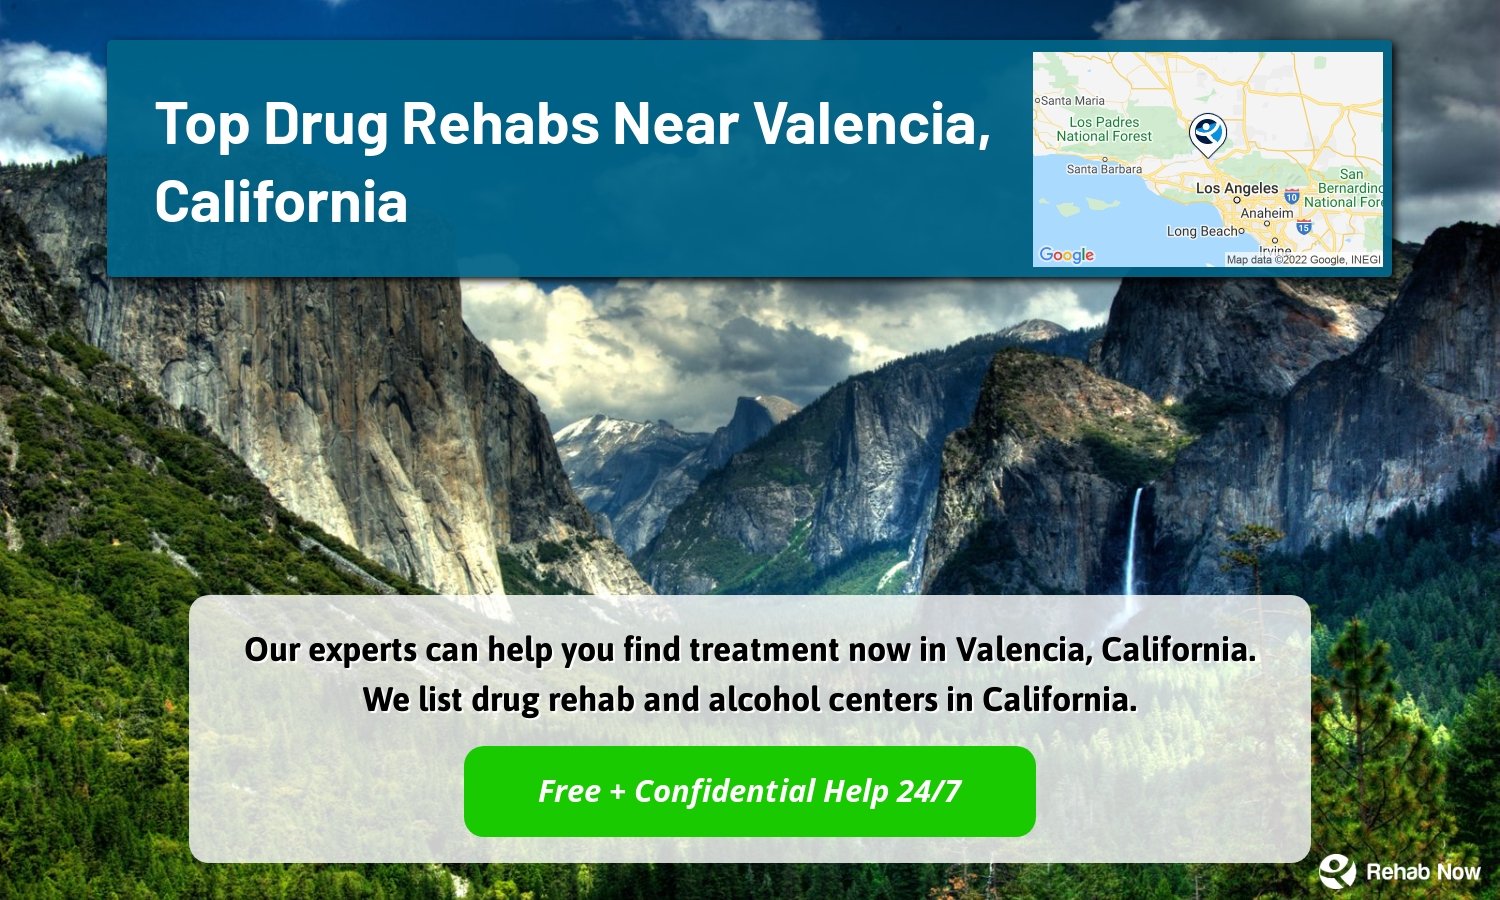 Our experts can help you find treatment now in Valencia, California. We list drug rehab and alcohol centers in California.